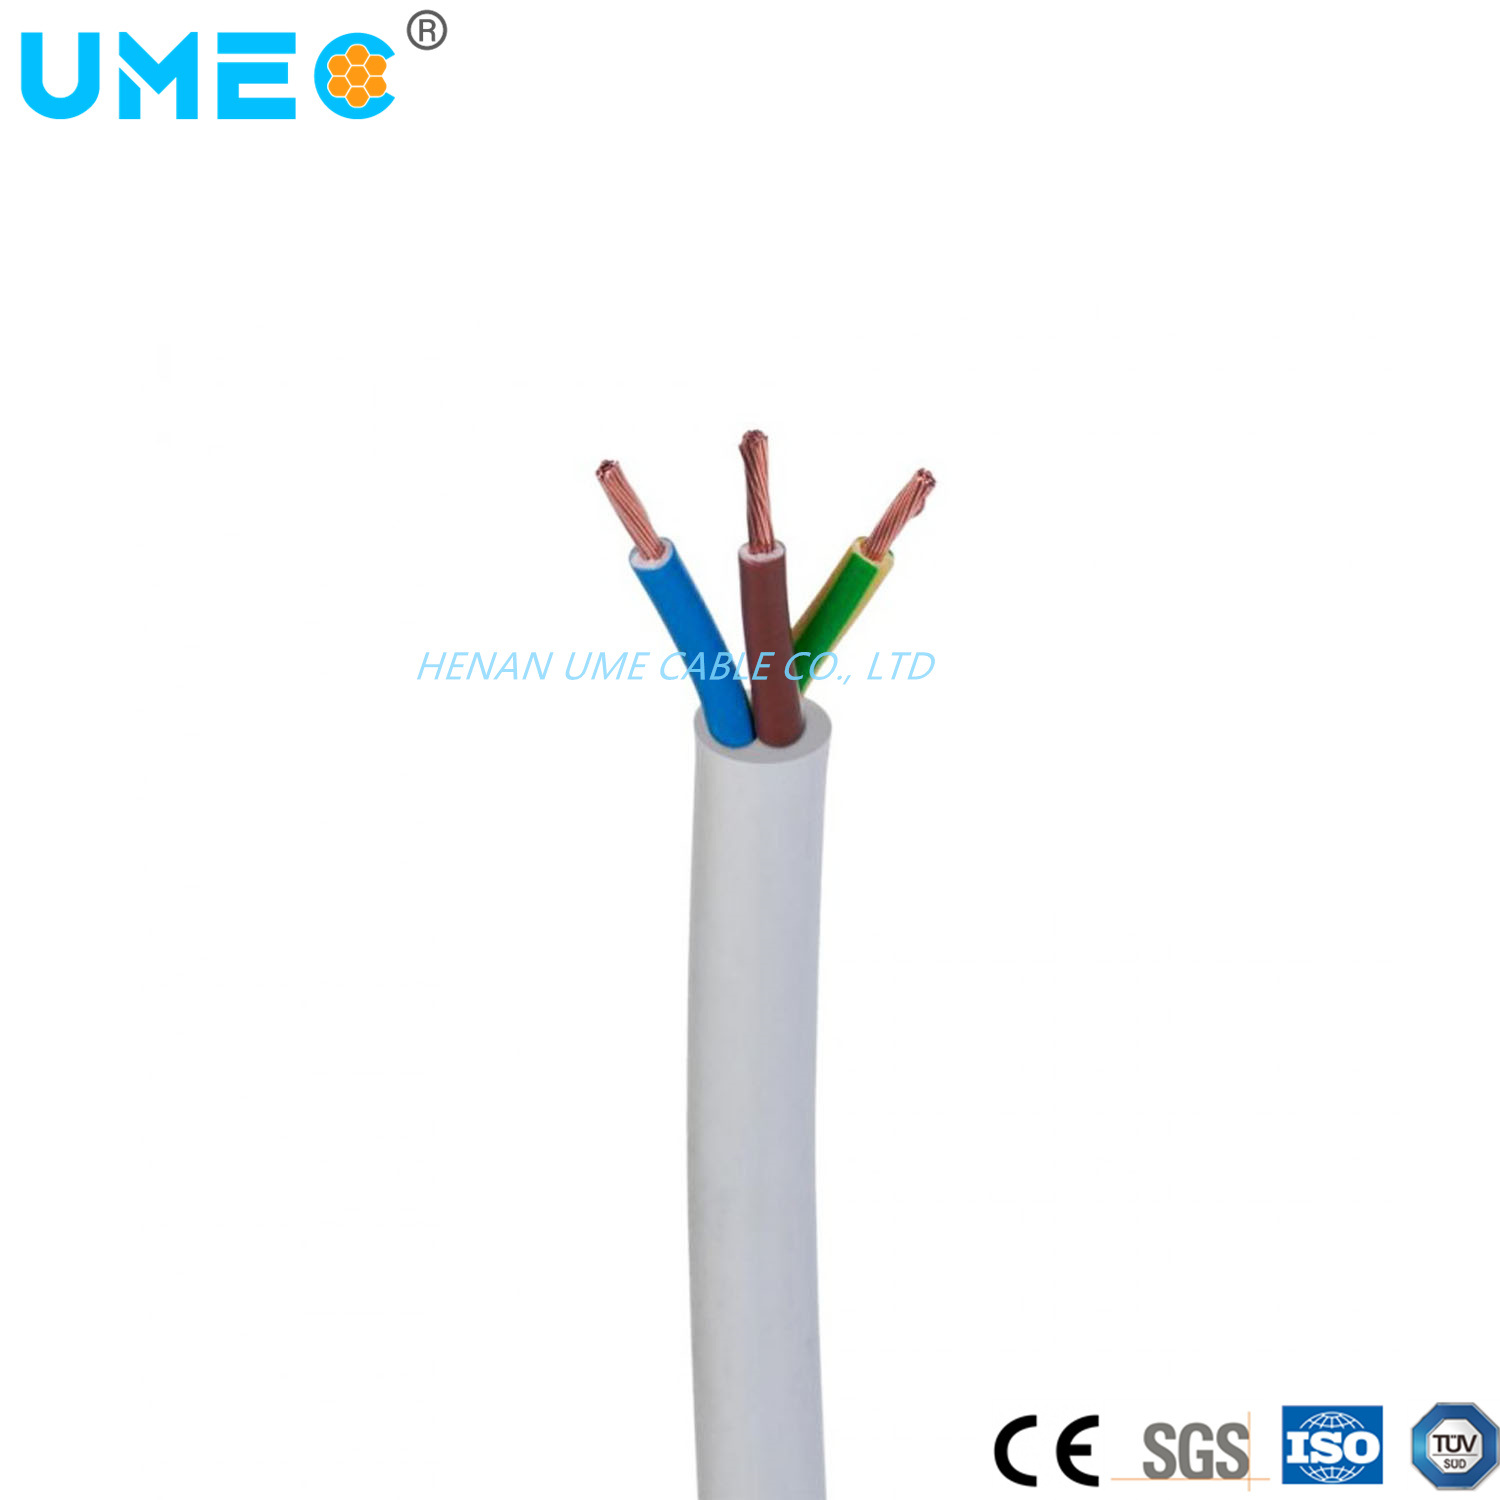 African Hot Selling Myym H05VV-F Cable Rvv 2X0.75mm2 2. X1mm2 3X1.5mm2 3X4mm2 4X4mm2 5X4mm2 Price